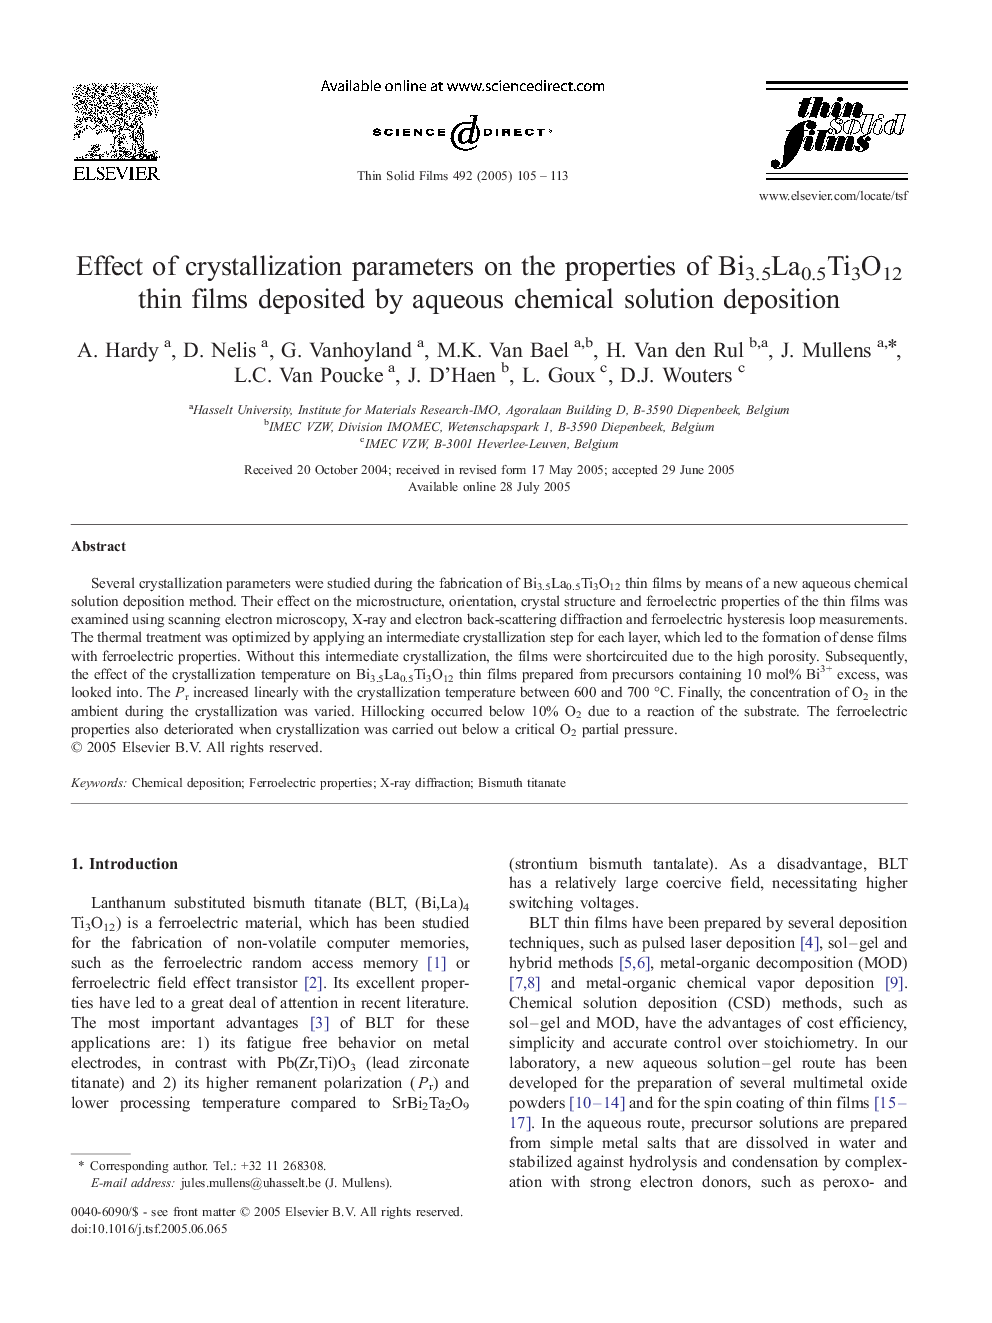 Effect of crystallization parameters on the properties of Bi3.5La0.5Ti3O12 thin films deposited by aqueous chemical solution deposition